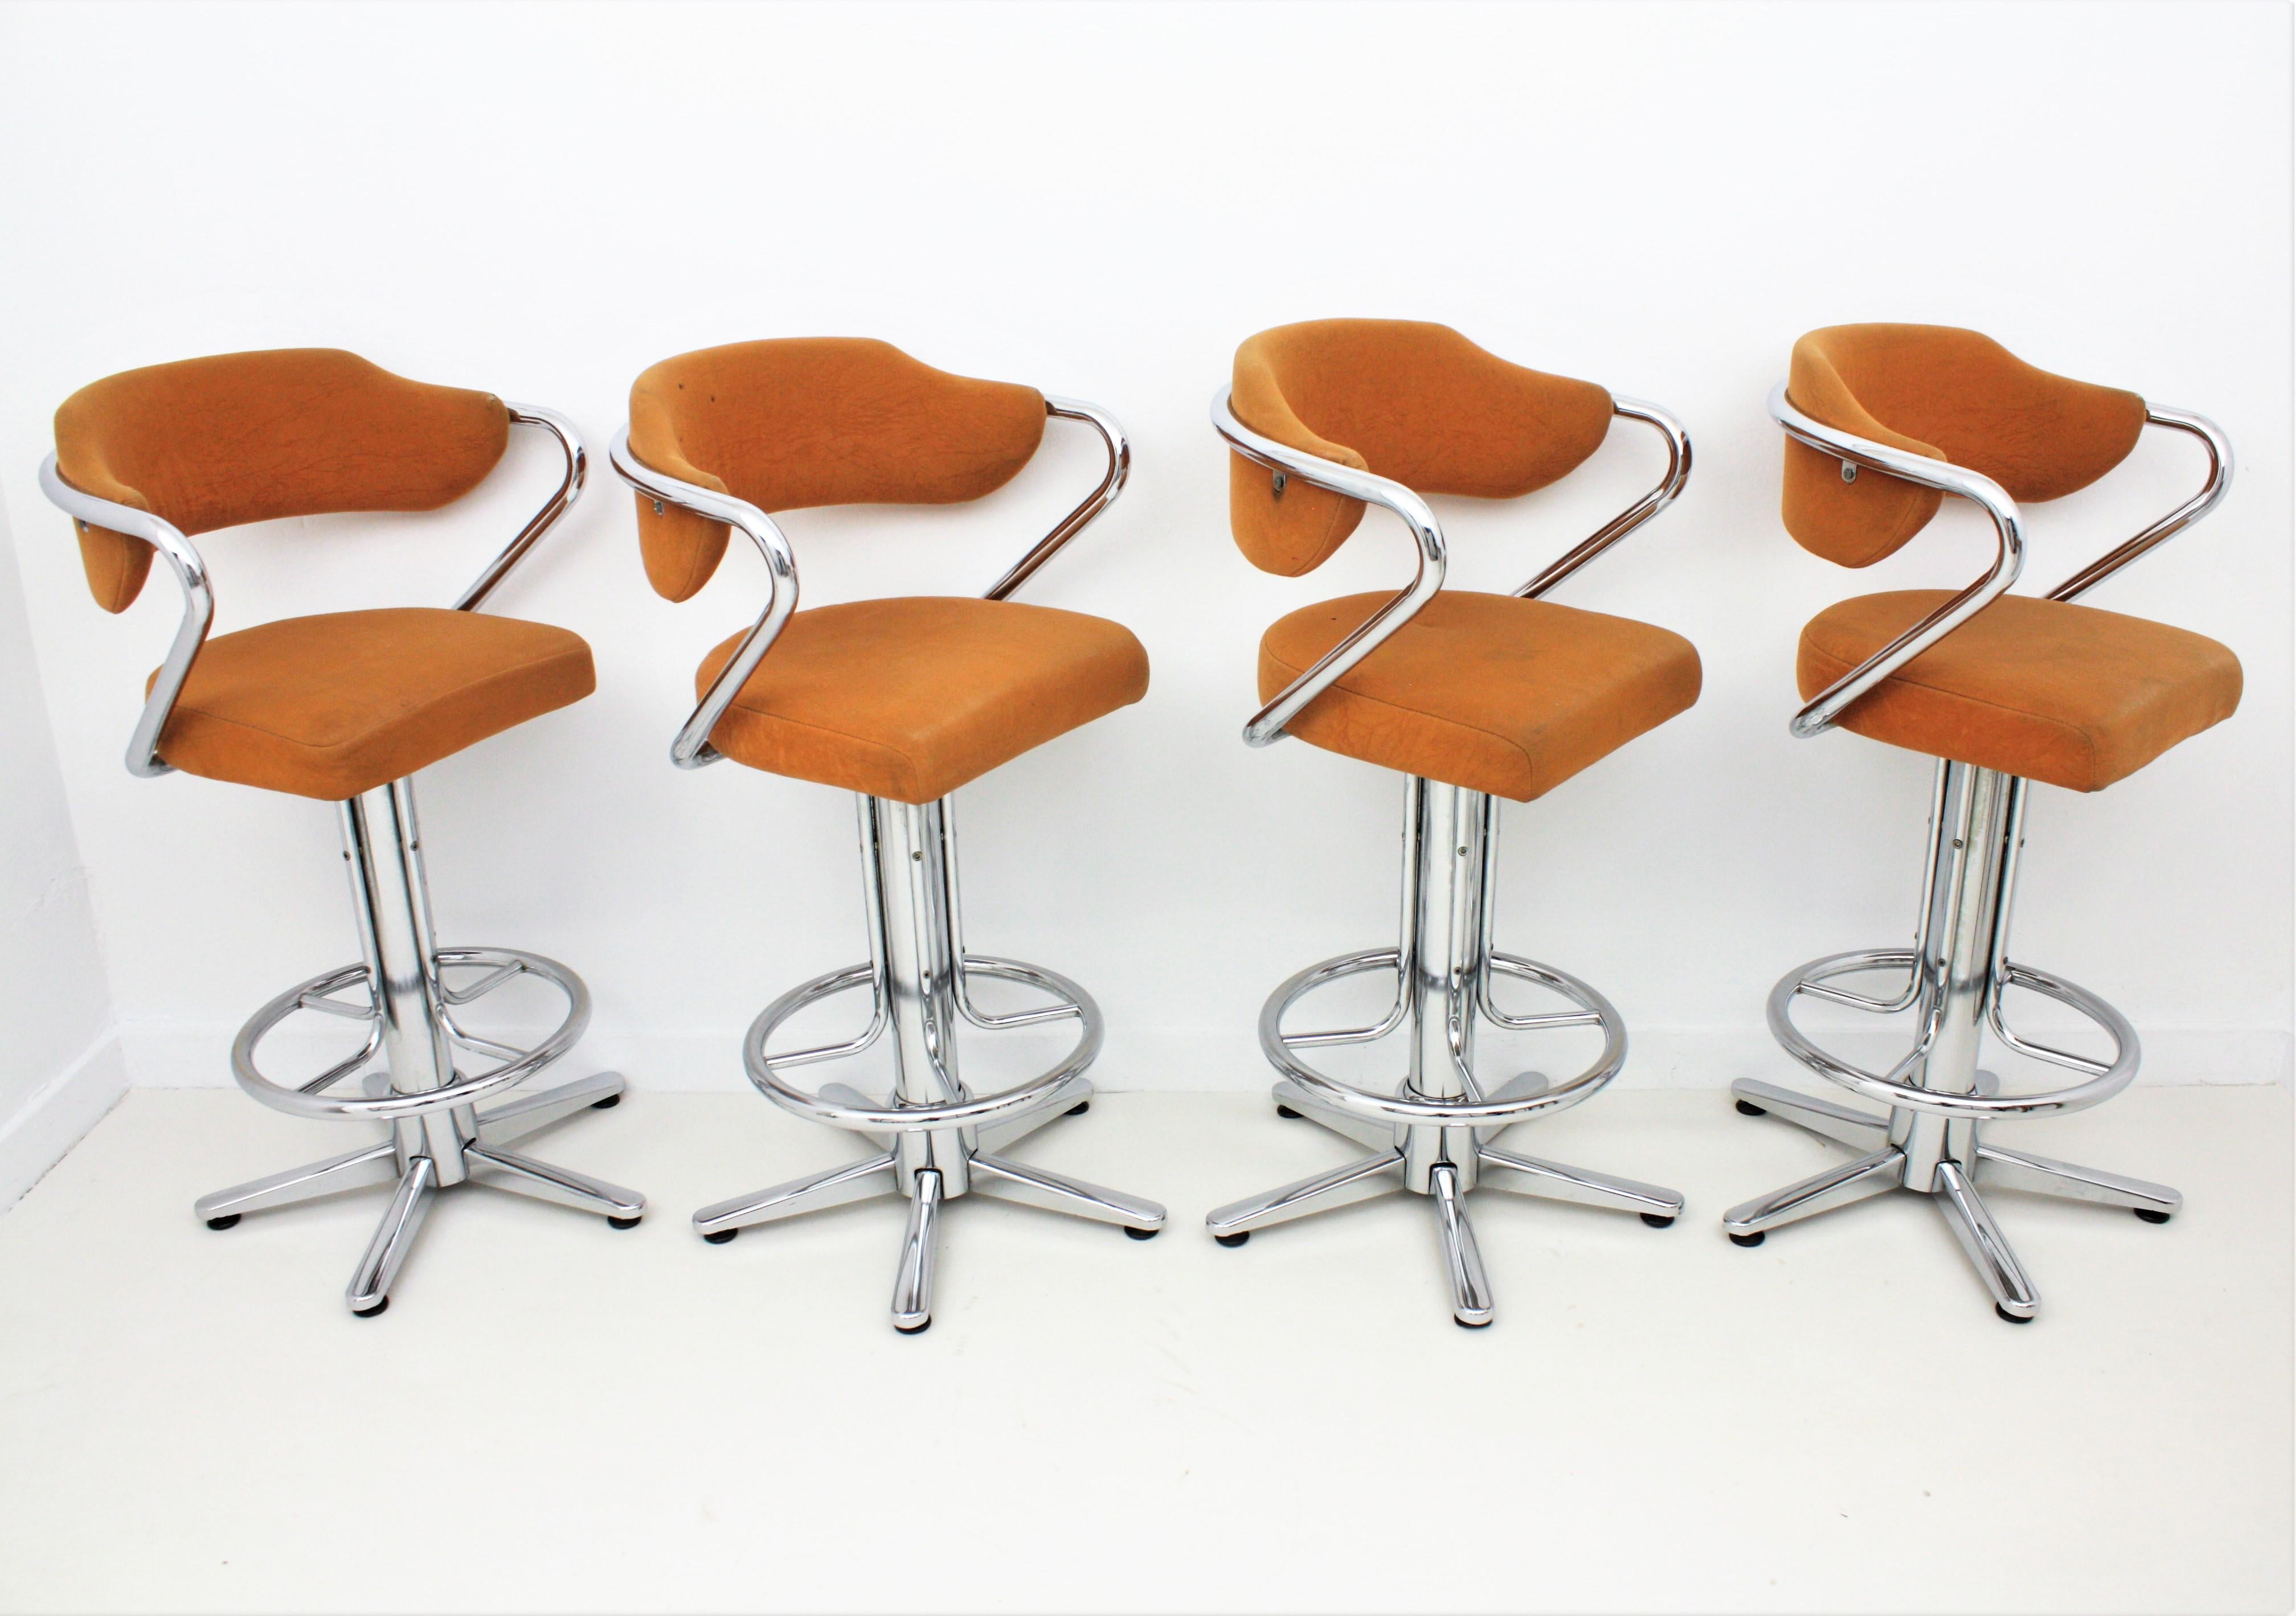 Spanish Set of Four Steel Swivel Bar Stools with Arms, Spain, 1970s